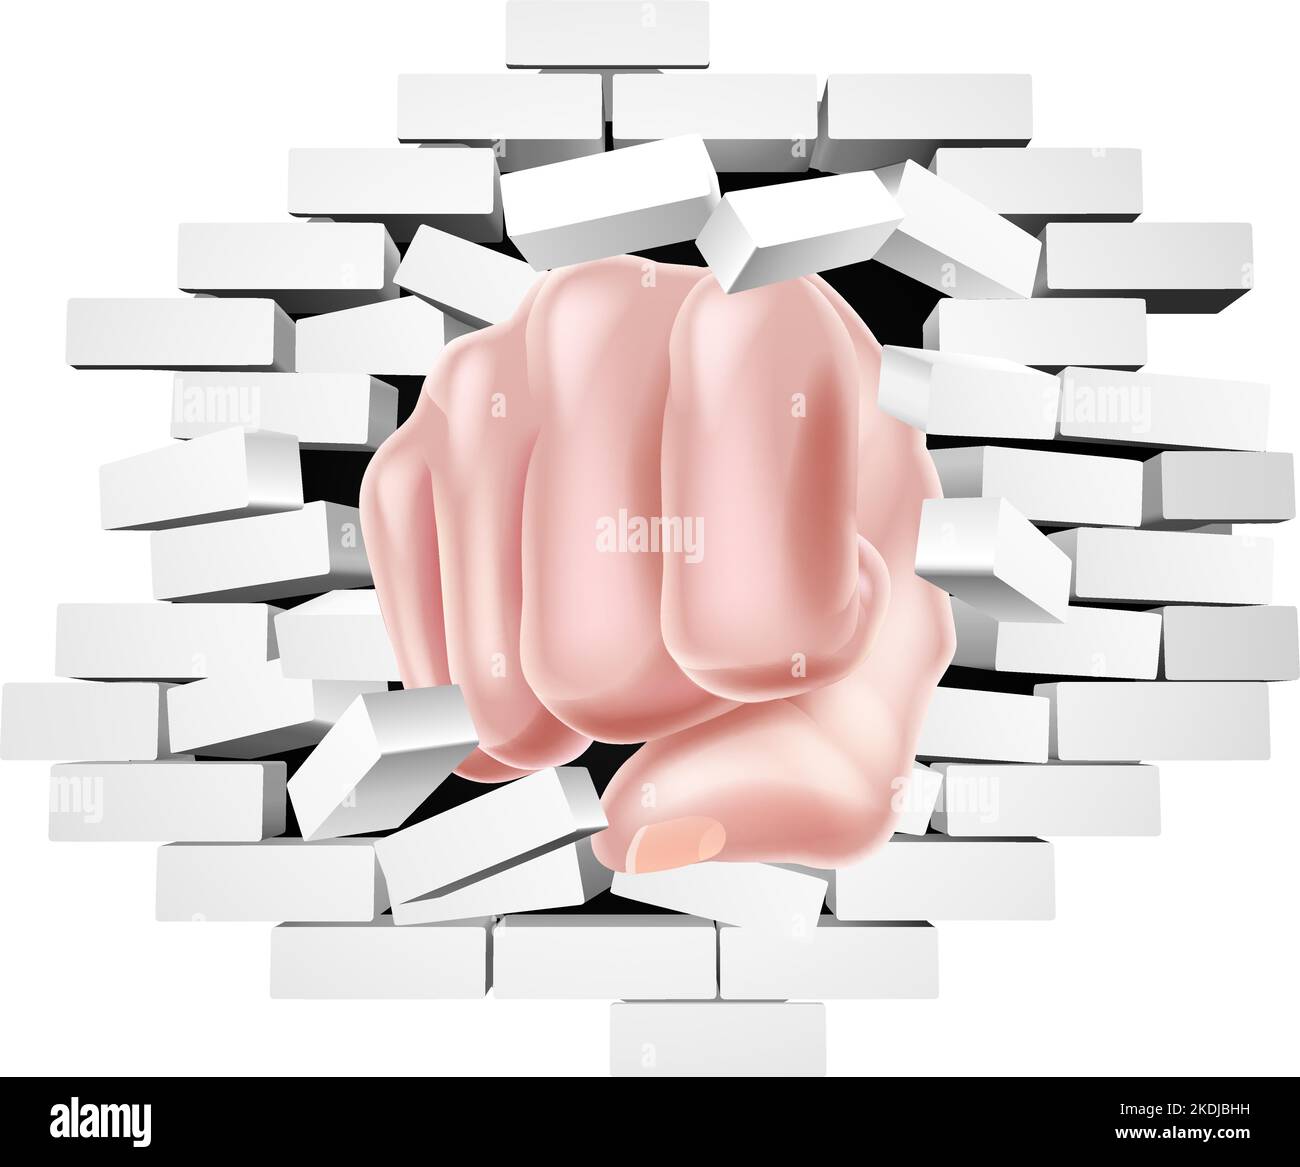 Fist Hand Punching Through a Brick Wall Concept Stock Vector